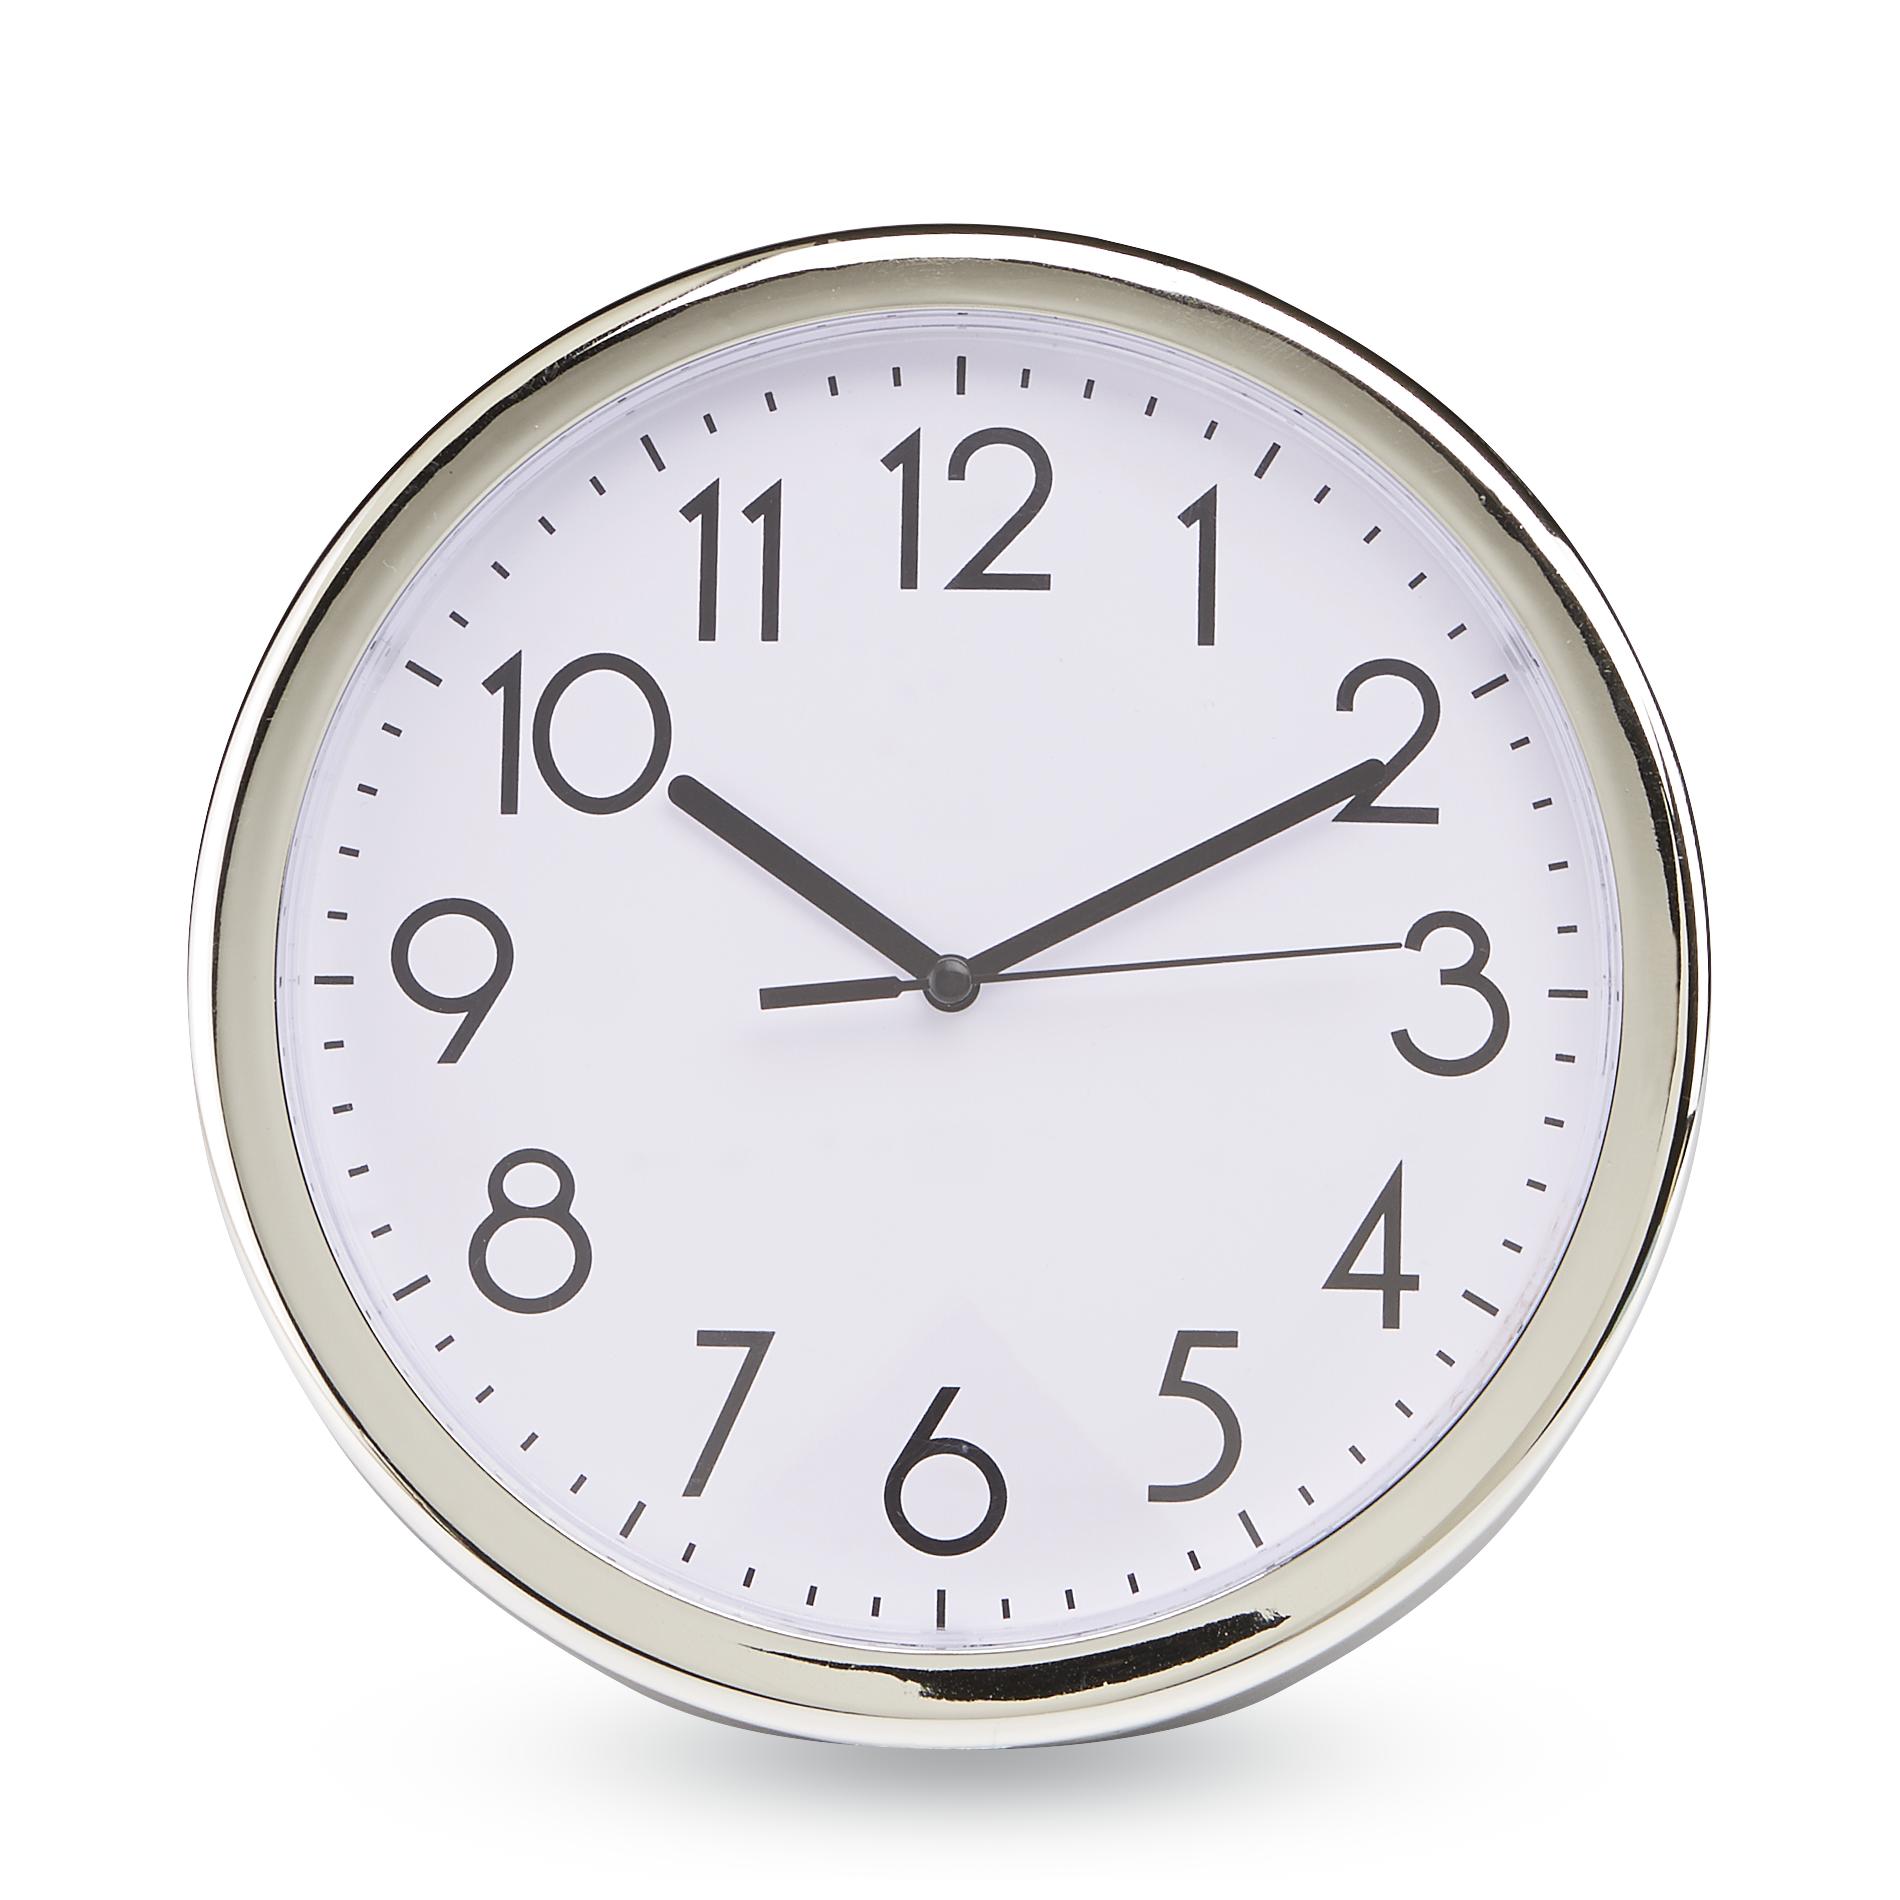 The Great Find 9-Inch Silver Circular Wall Clock | Shop Your Way ...